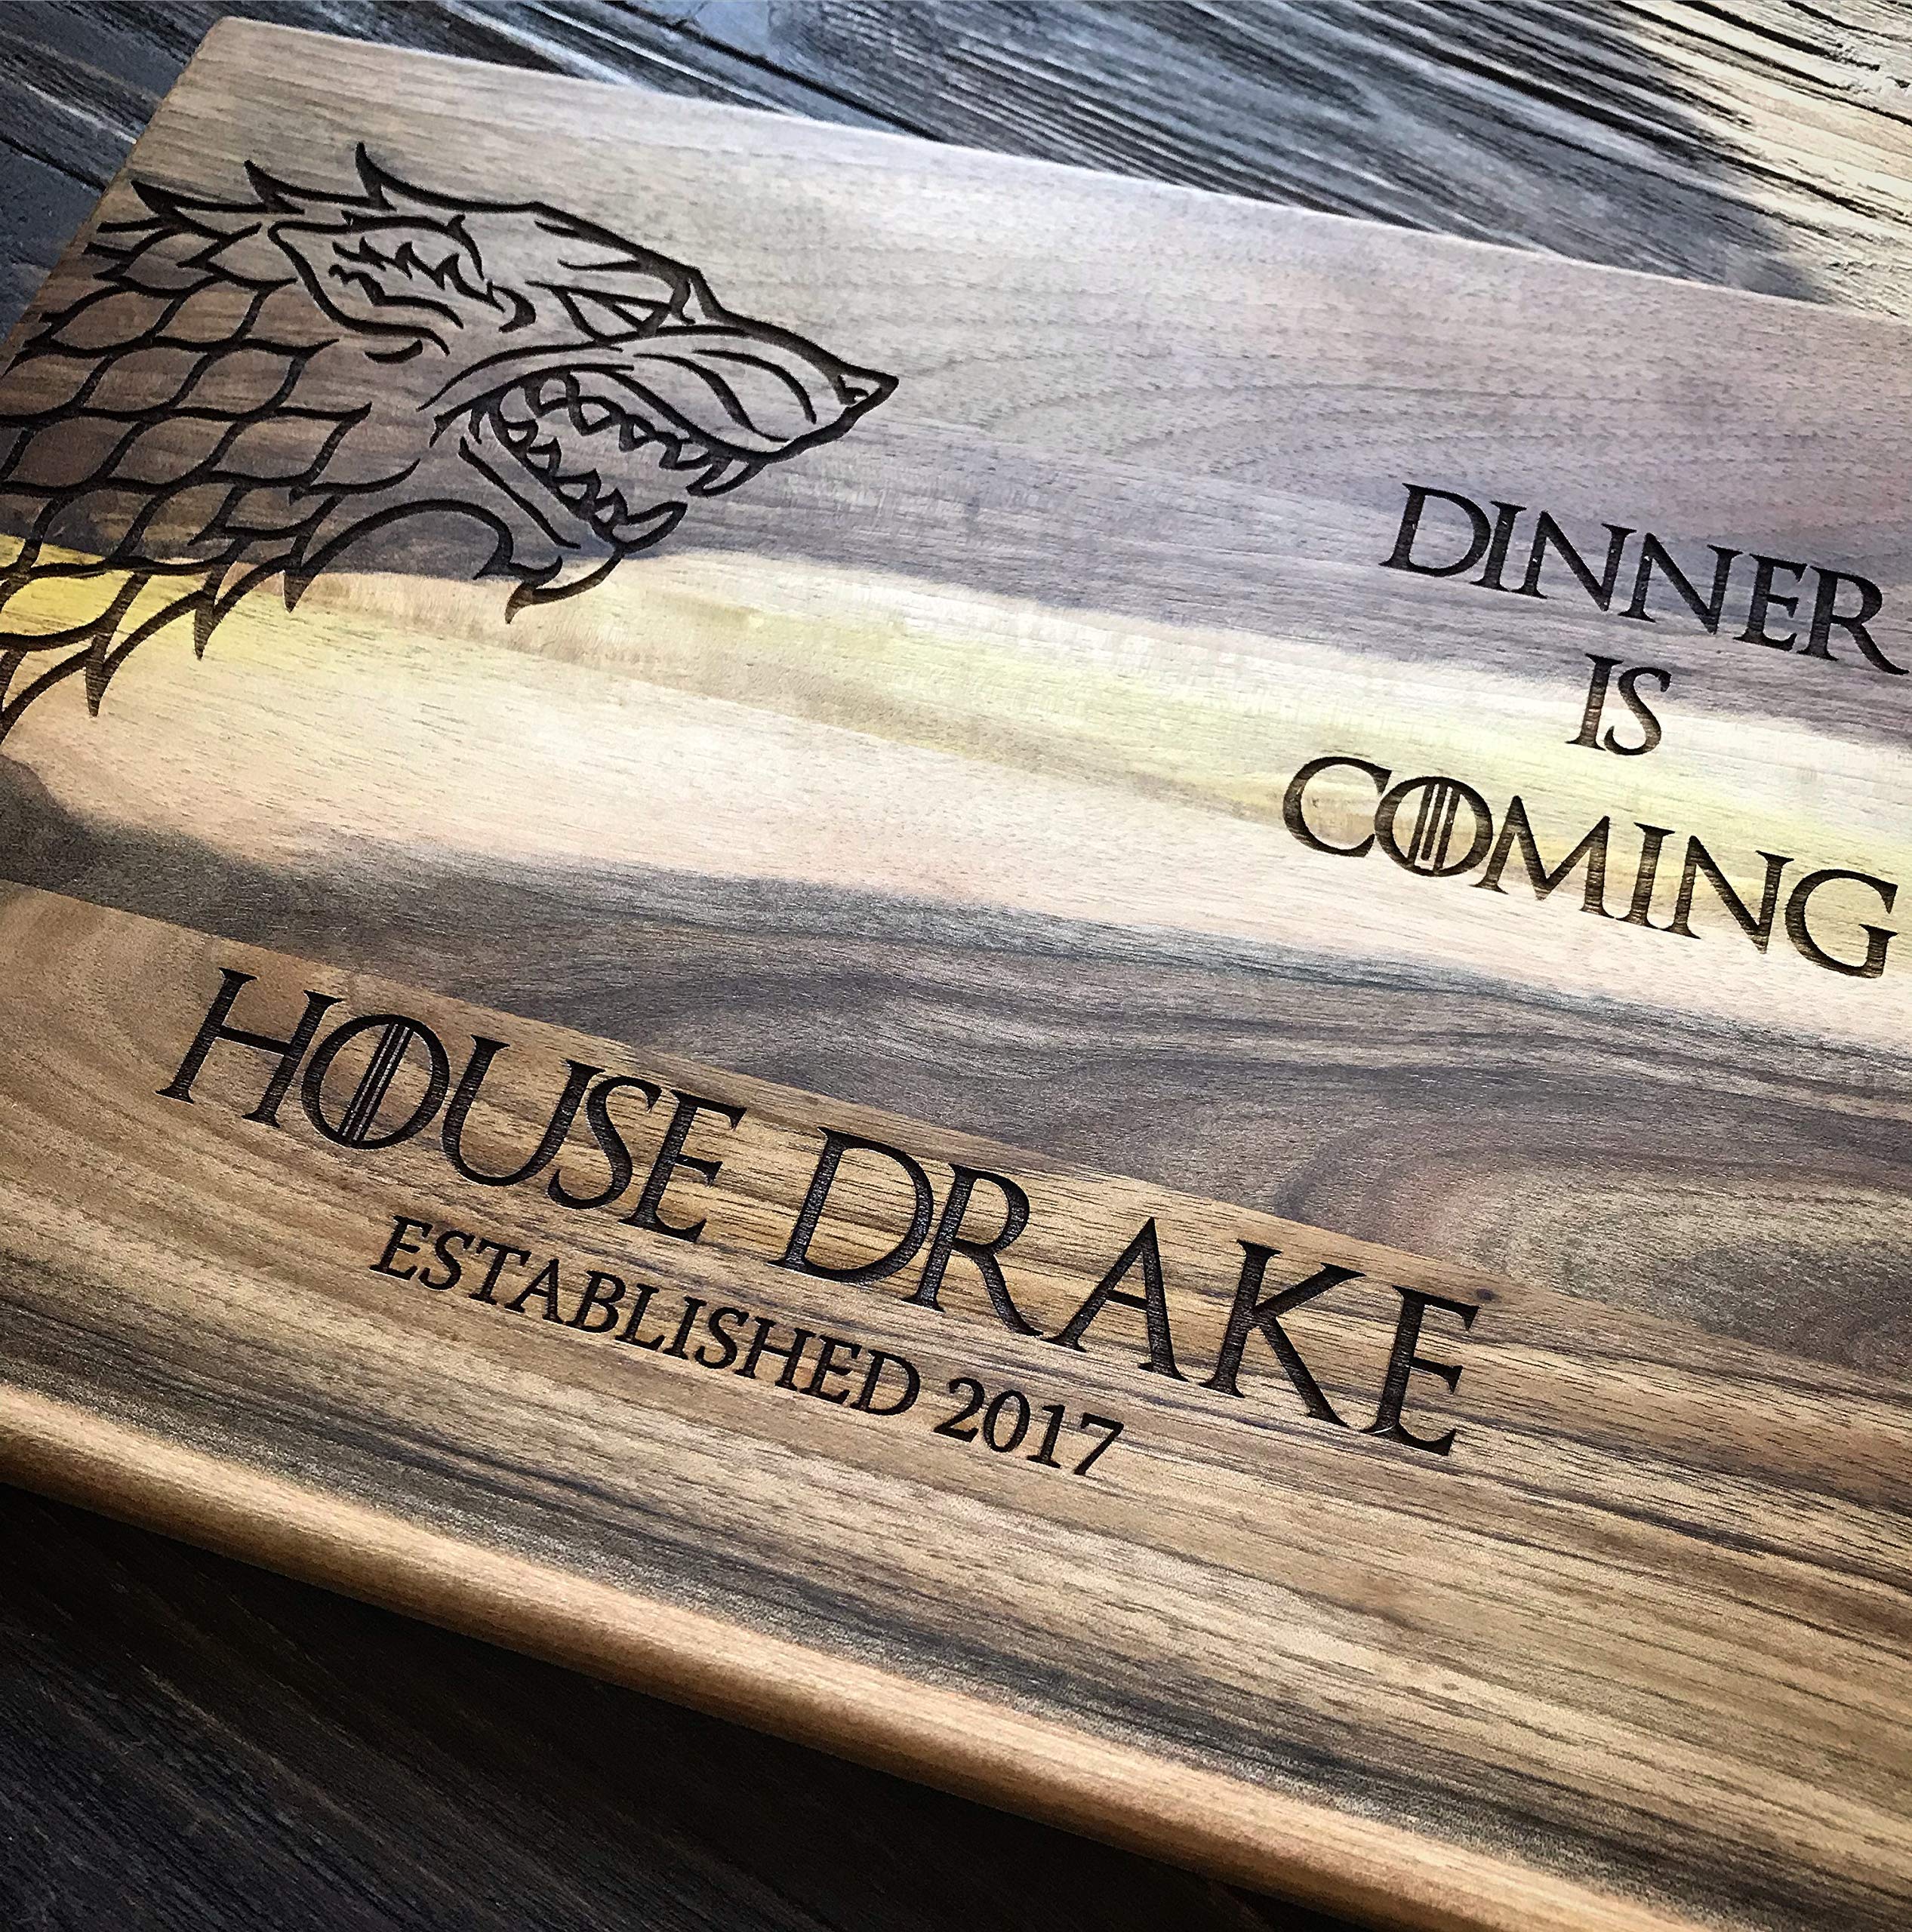 Personalized Cutting Board Dinner is coming Games of thrones House Stark Direwolf Engraved Custom Family chopping Wedding Gift Anniversary Housewarming Birthday game01